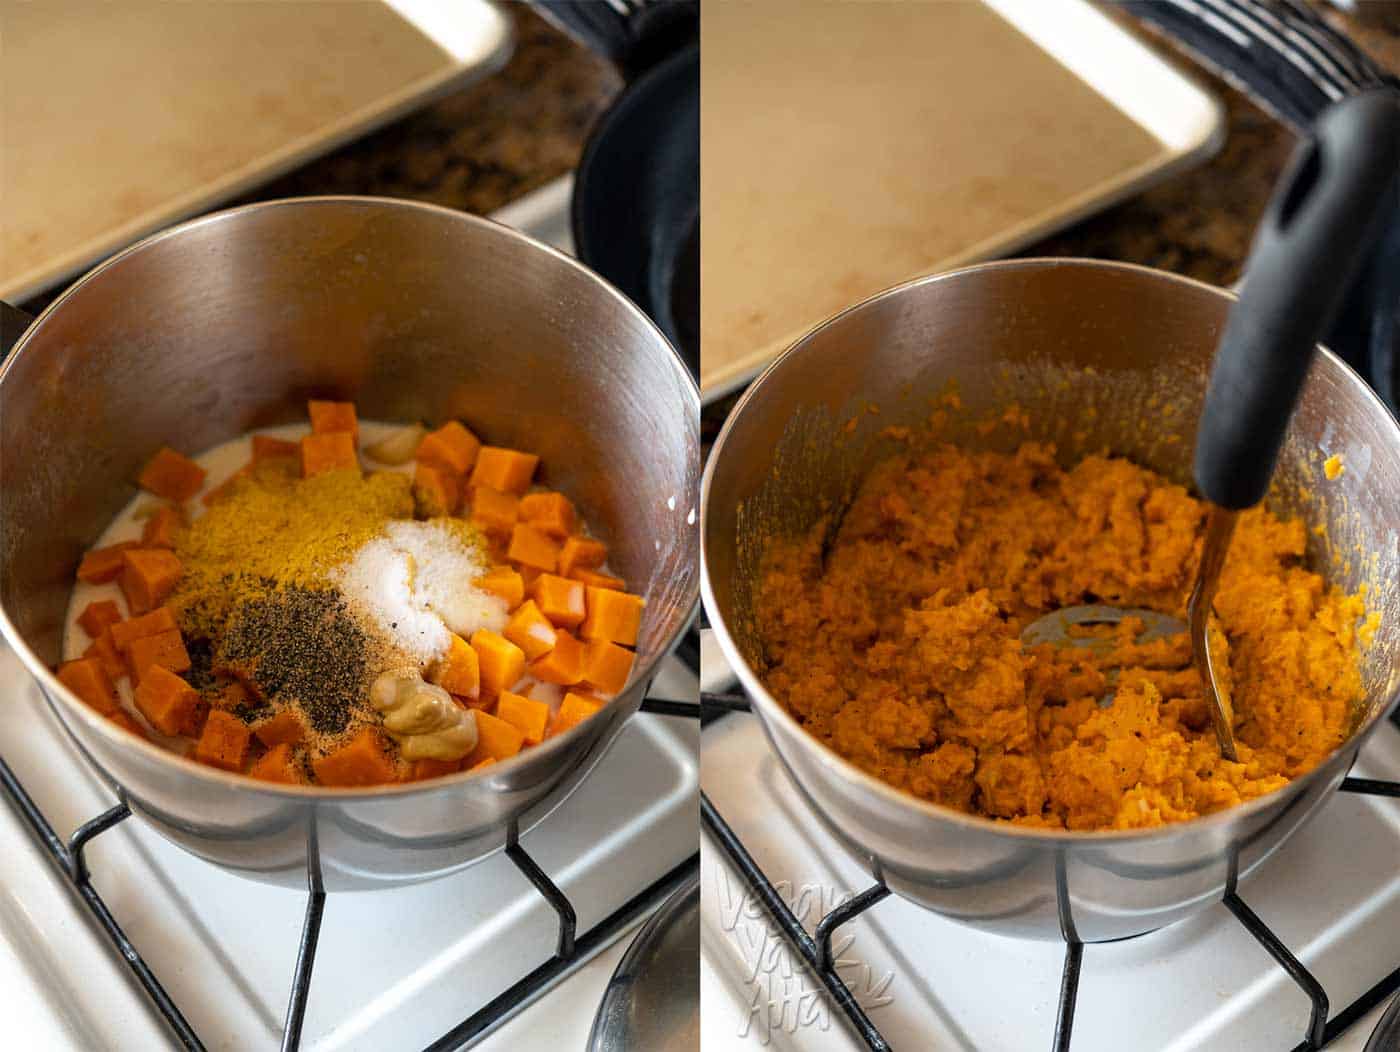 Images of sweet potato filling being made in a pot